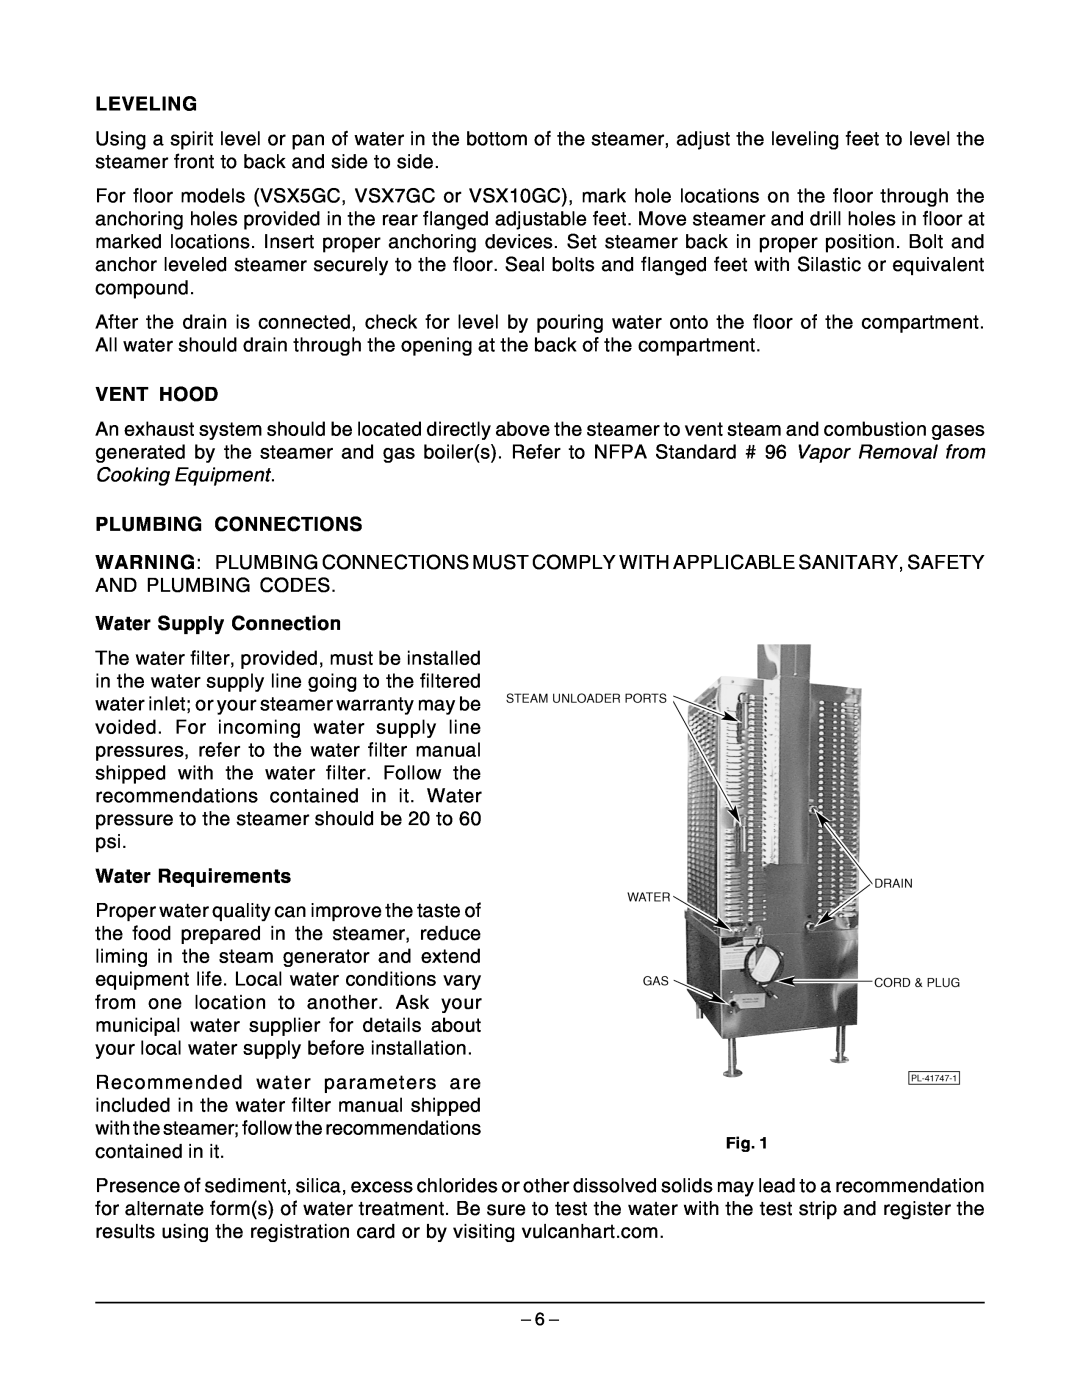 Vulcan-Hart VSX7GC Leveling, Vent Hood, Plumbing Connections, Water Supply Connection, Water Requirements, contained in it 